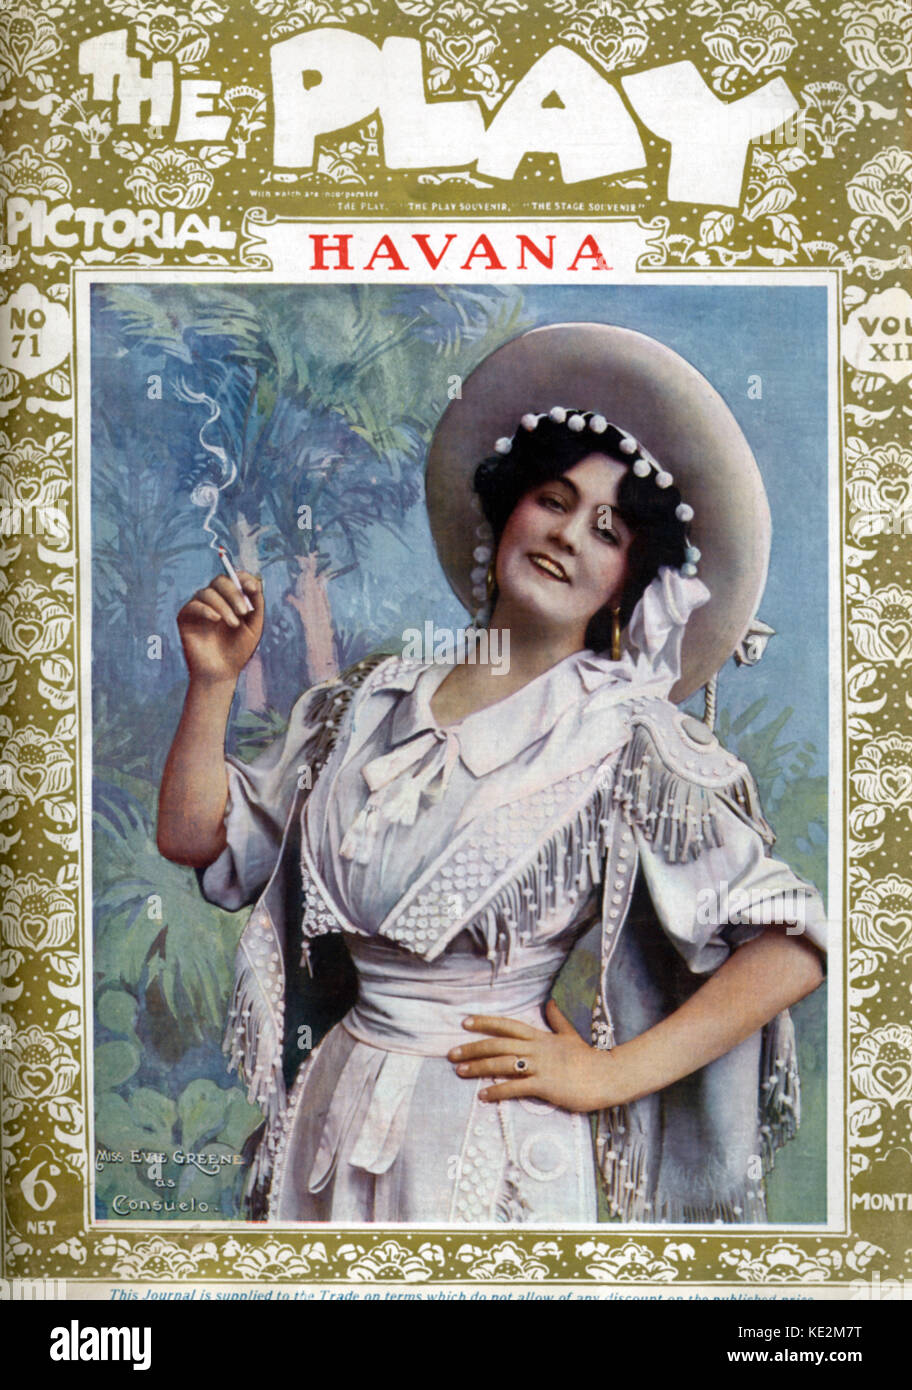 Havana - Evie Greene as Consuelo, Gaiety Theatre, London, 1908. 1878 - 11 Sepetember 1917.  Edwardian view of Cuba.  Musical by George Grossmith, Leslie Stuart, Adrian Ross, Graham Hill.  She is smoking a cigarette.  Wering a hat and shawl. Stock Photo